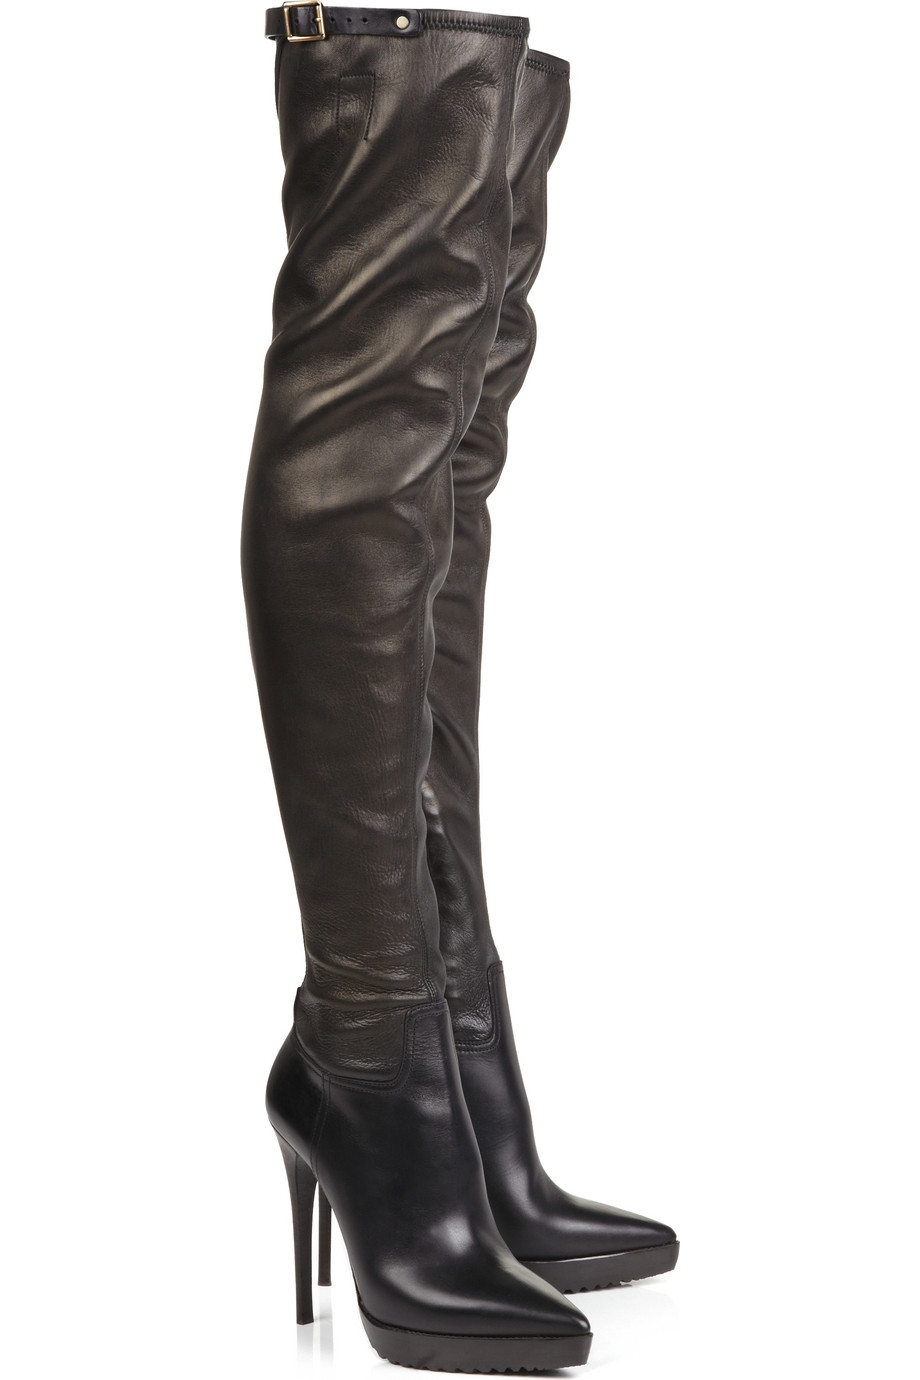 Burberry Prorsum Leather Thigh-high Boots in Black | Lyst